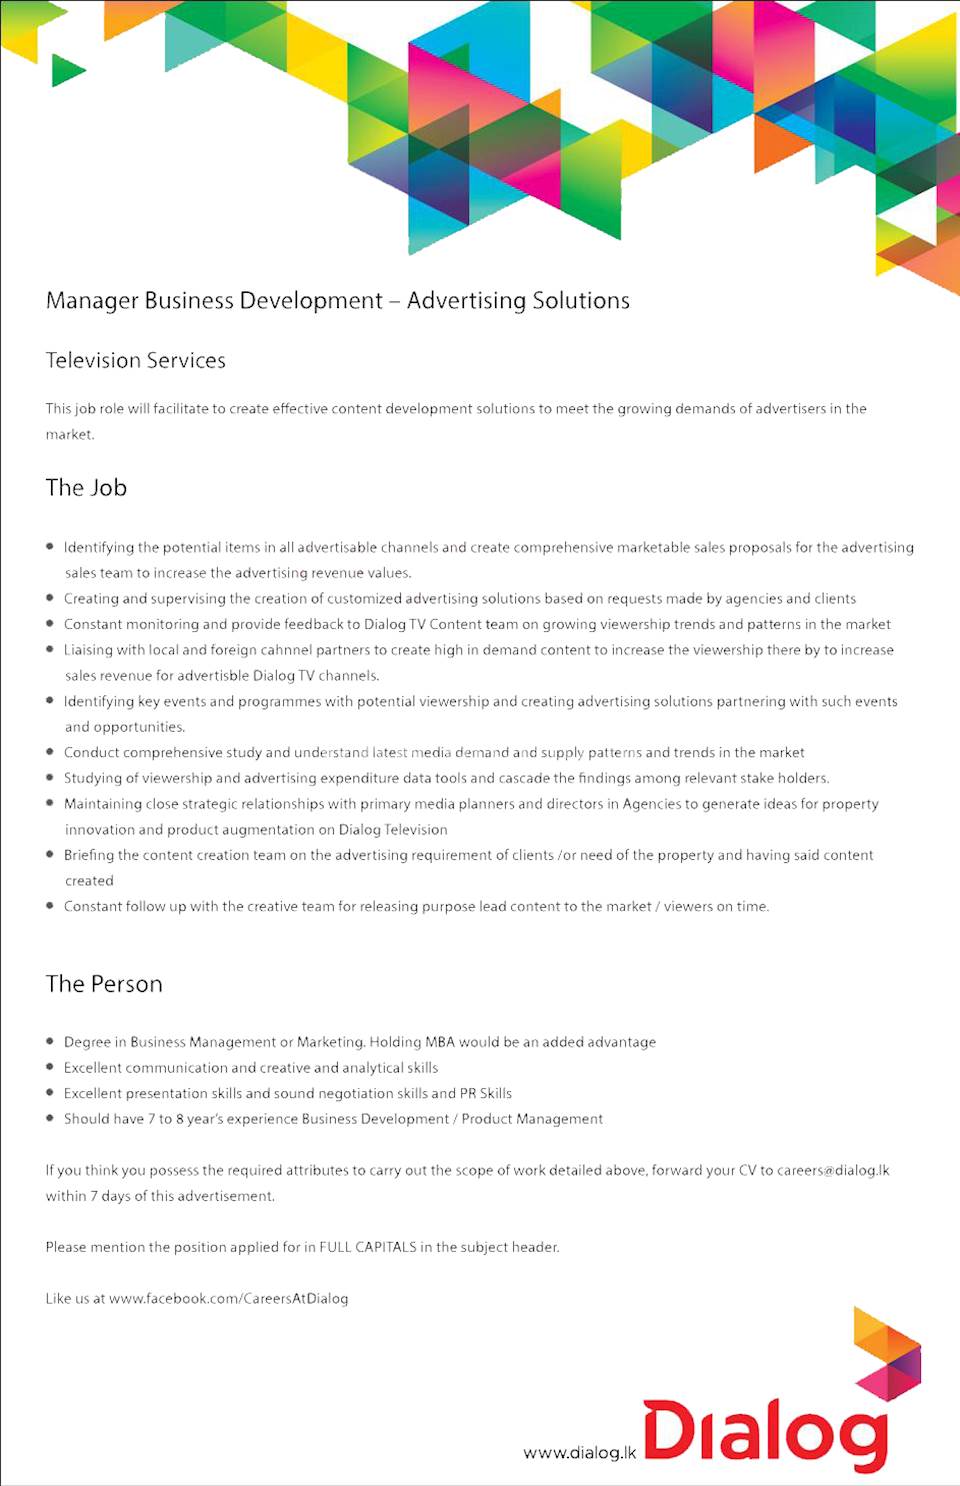 Manager Business Development - Advertising Solutions